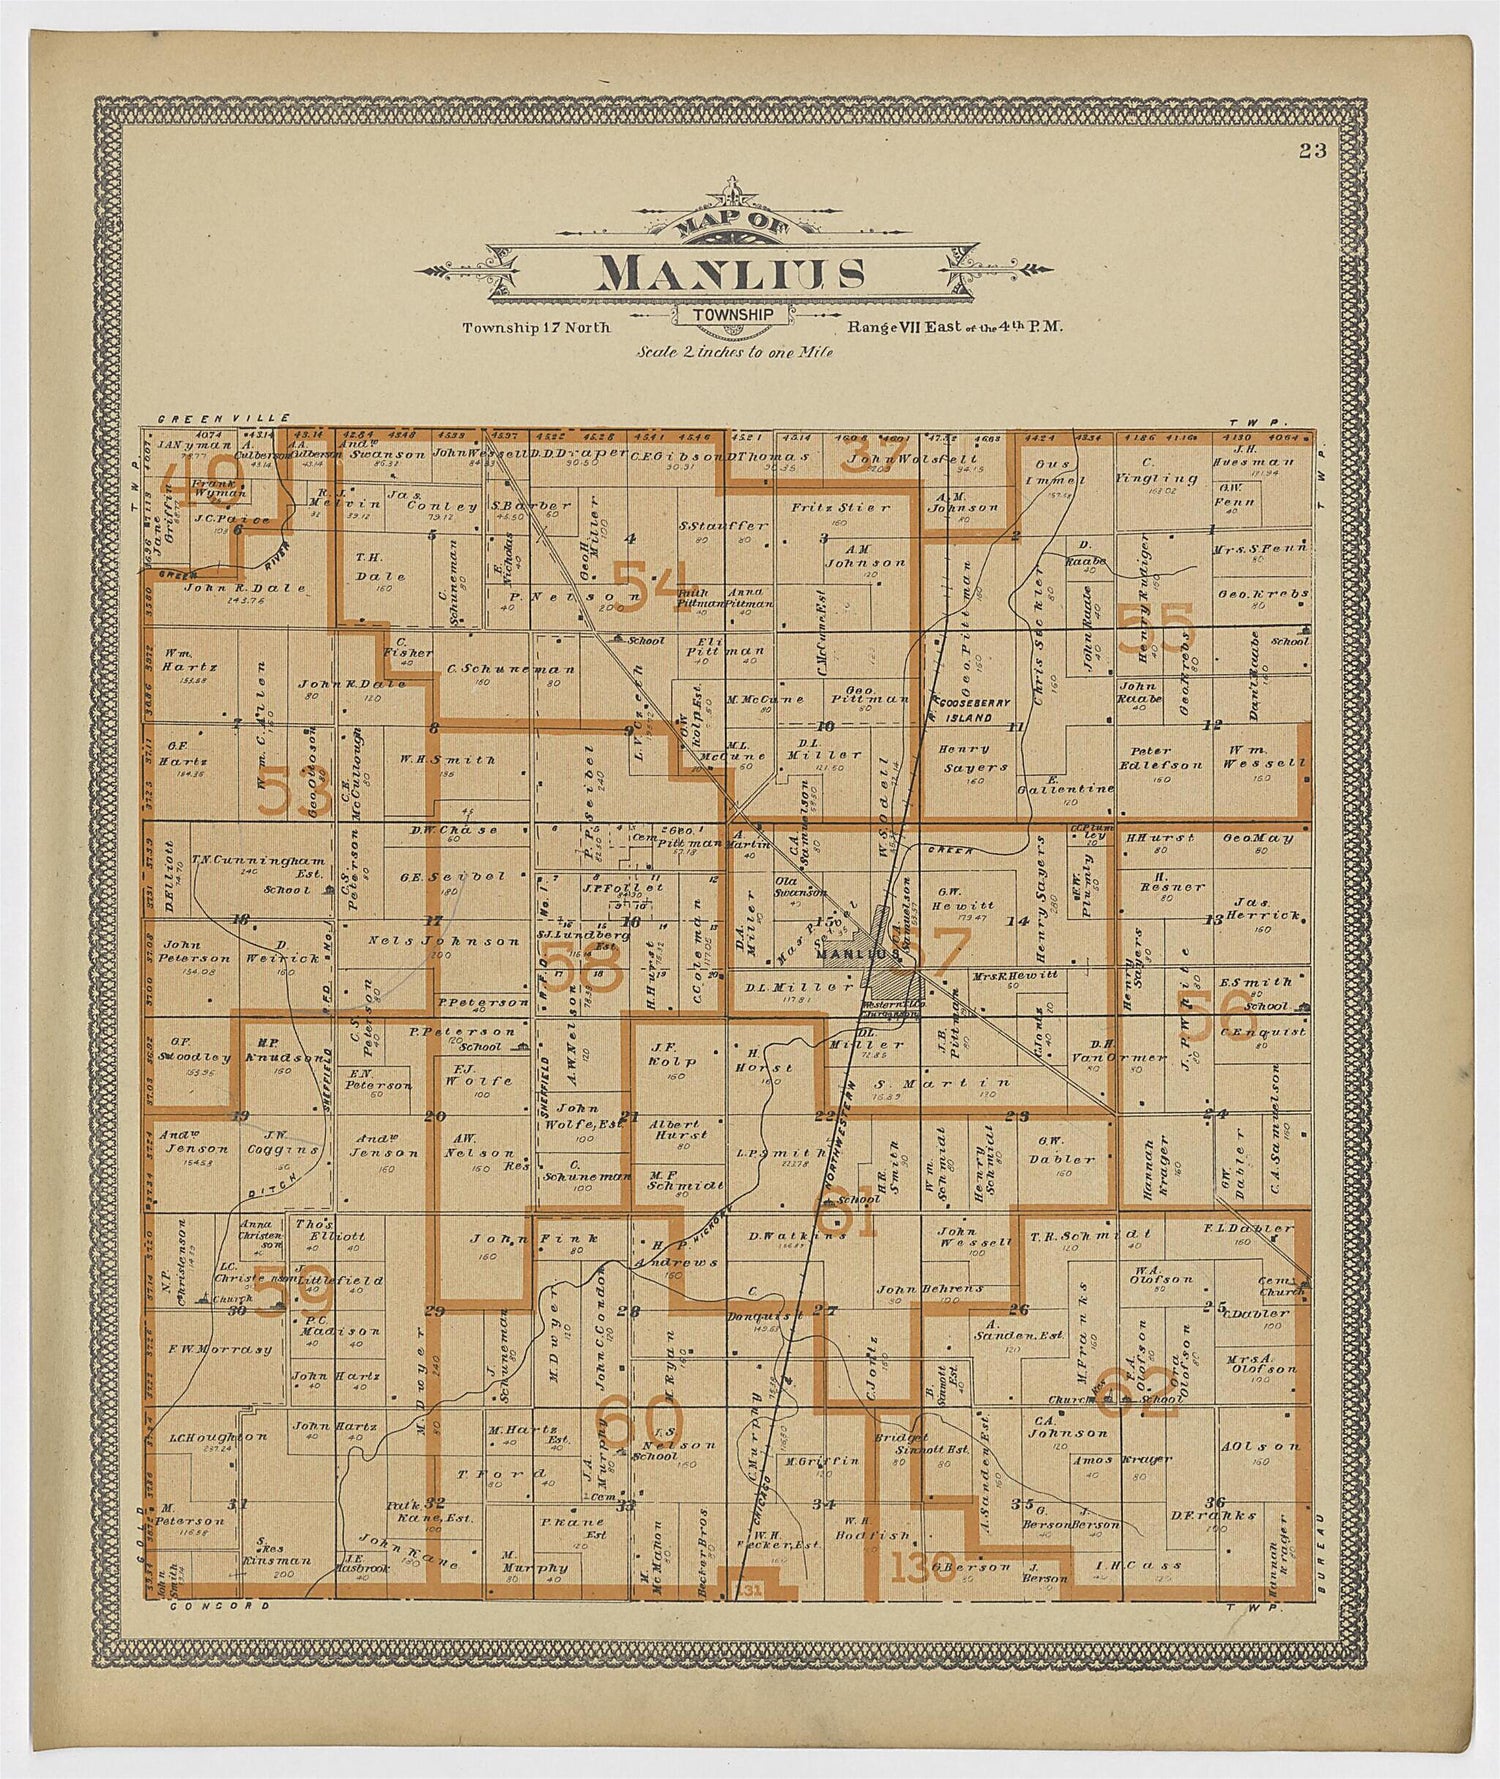 This old map of Image 13 of 20th Century Atlas of Bureau County, Illinois from Atlas of Bureau County, Illinois from 1905 was created by  Middle-West Publishing Co in 1905